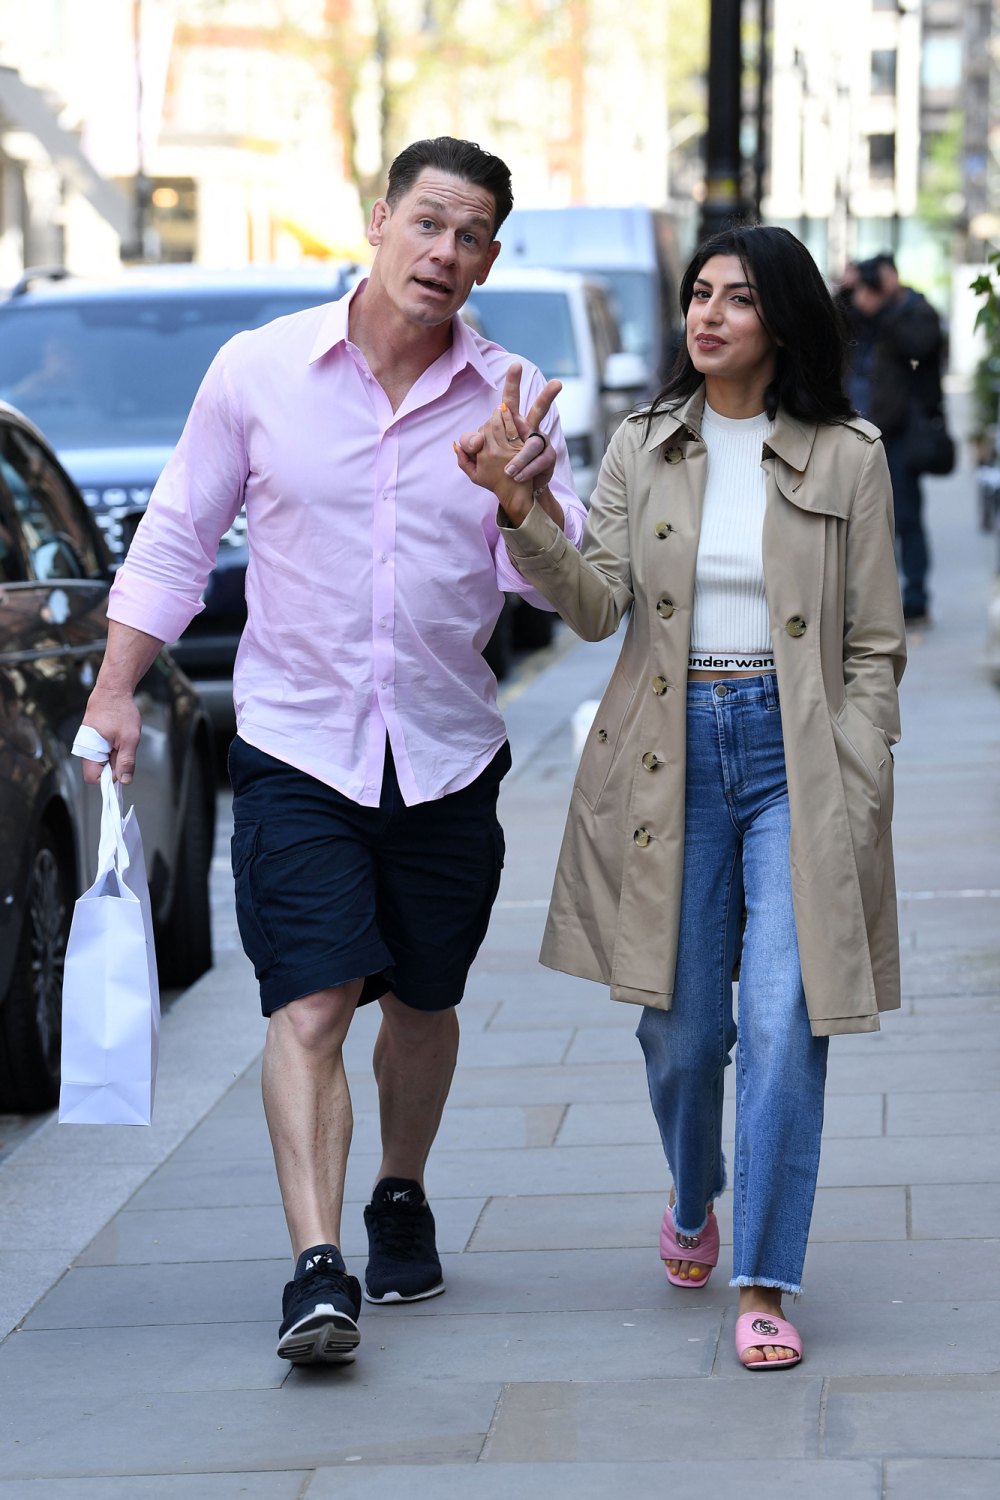 John Cena And His Wife Shay Shariatzadeh Were Photographed Sweetly ...